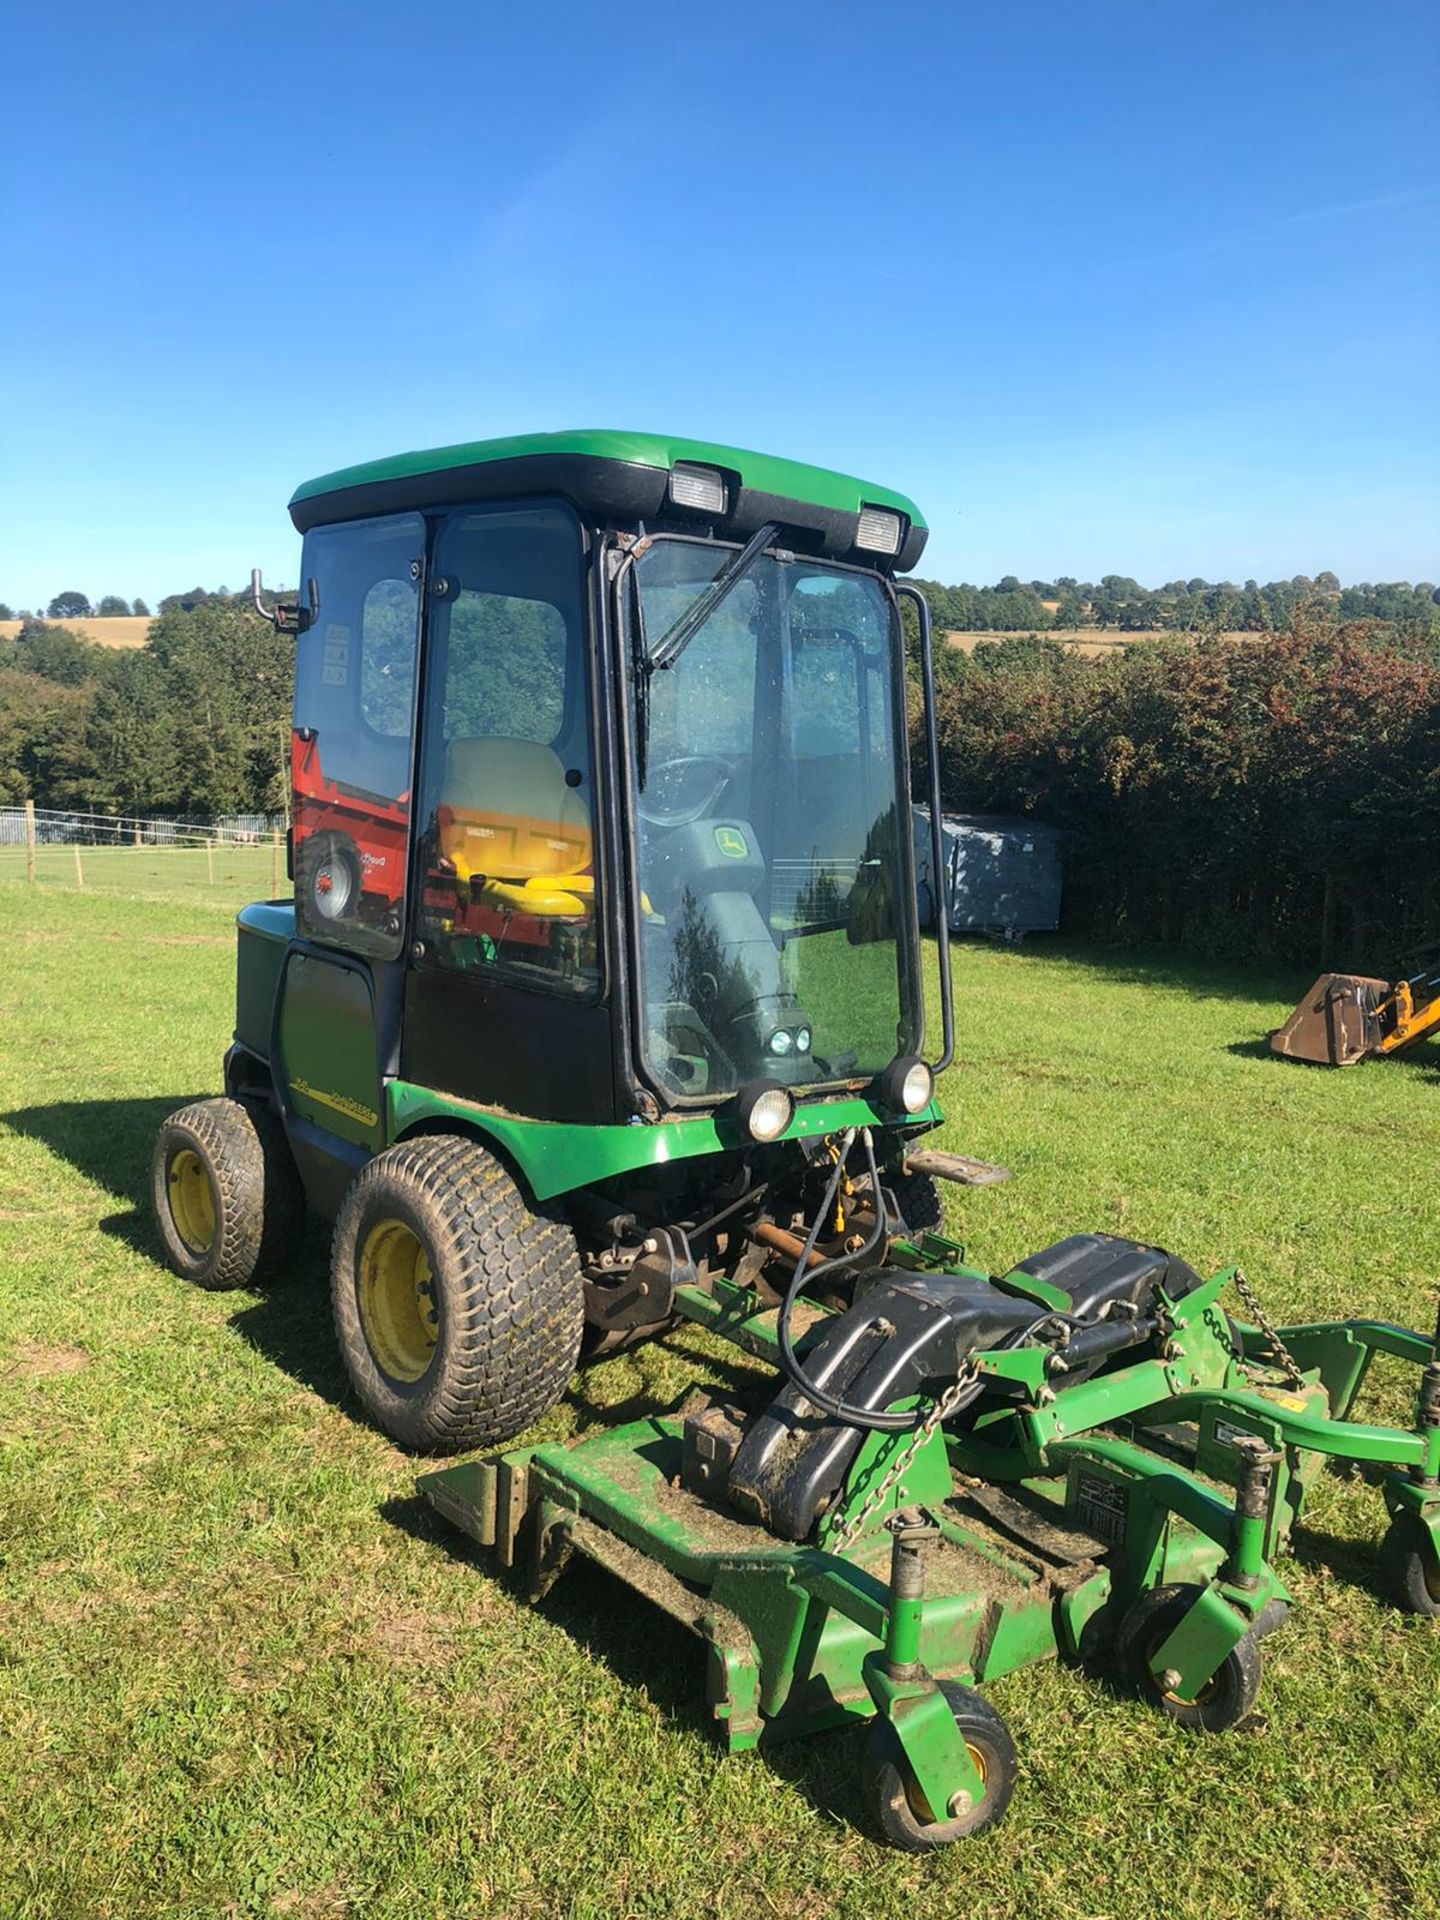 JOHN DEERE 1545 RIDE ON LAWN MOWER FULL GLASS CAB, RUNS, WORKS AND CUTS *PLUS VAT* - Image 7 of 7